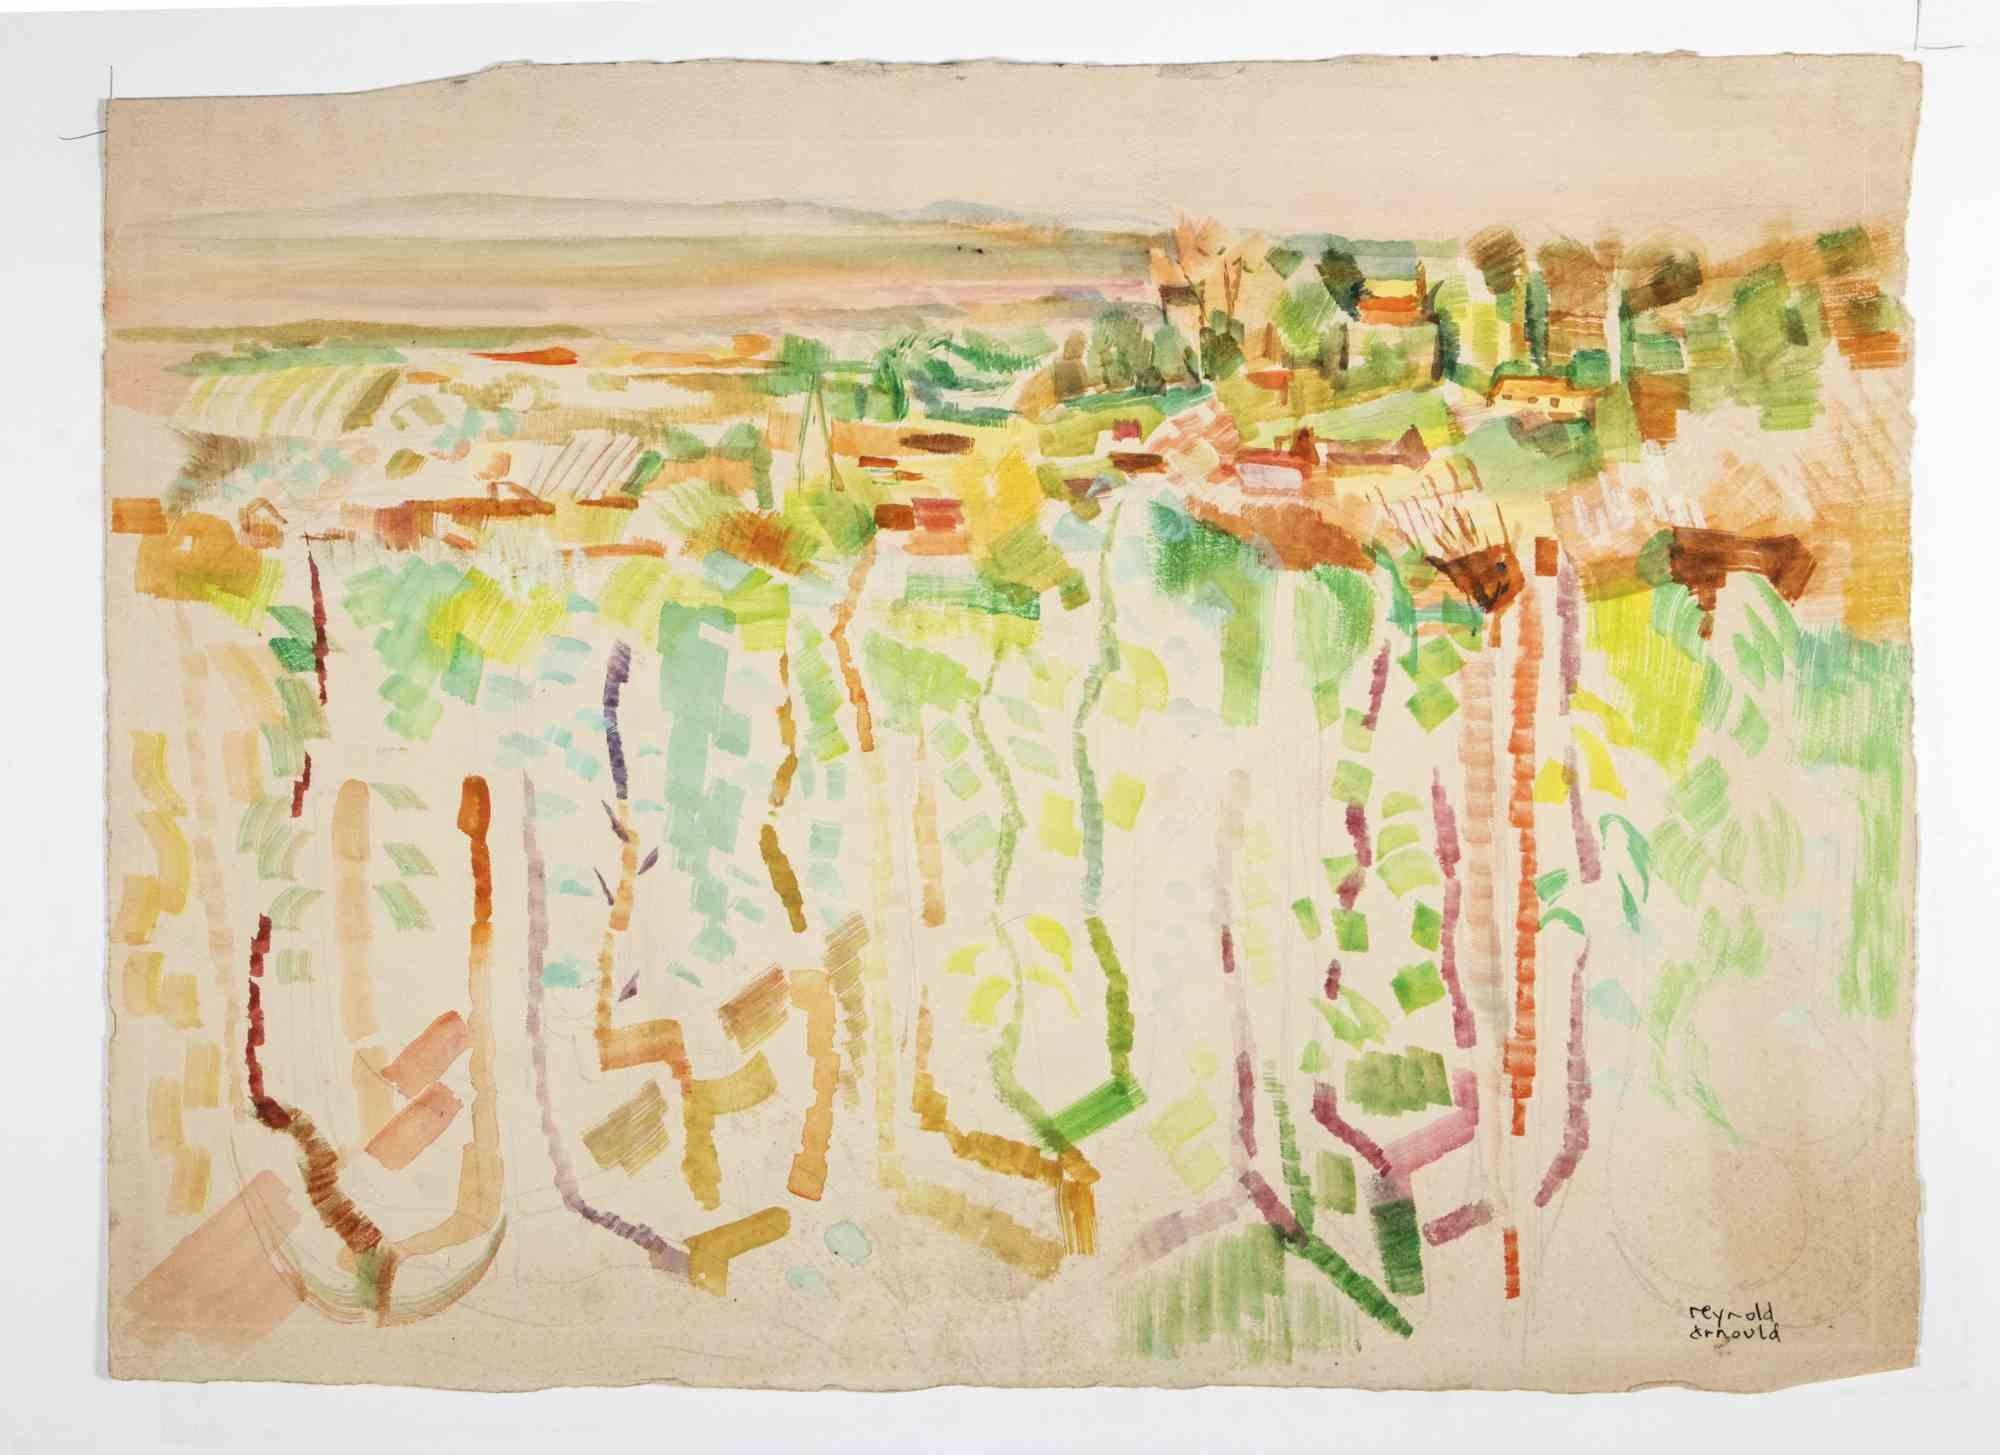 Landscape is a Watercolor Drawing realized by Reynold Arnould  (Le Havre 1919 - Parigi 1980).

Good condition included a white cardboard passpartout (70x51 cm).

Hand-signed on the lower right corner.

Reynold Arnould was born in Le Havre, France in